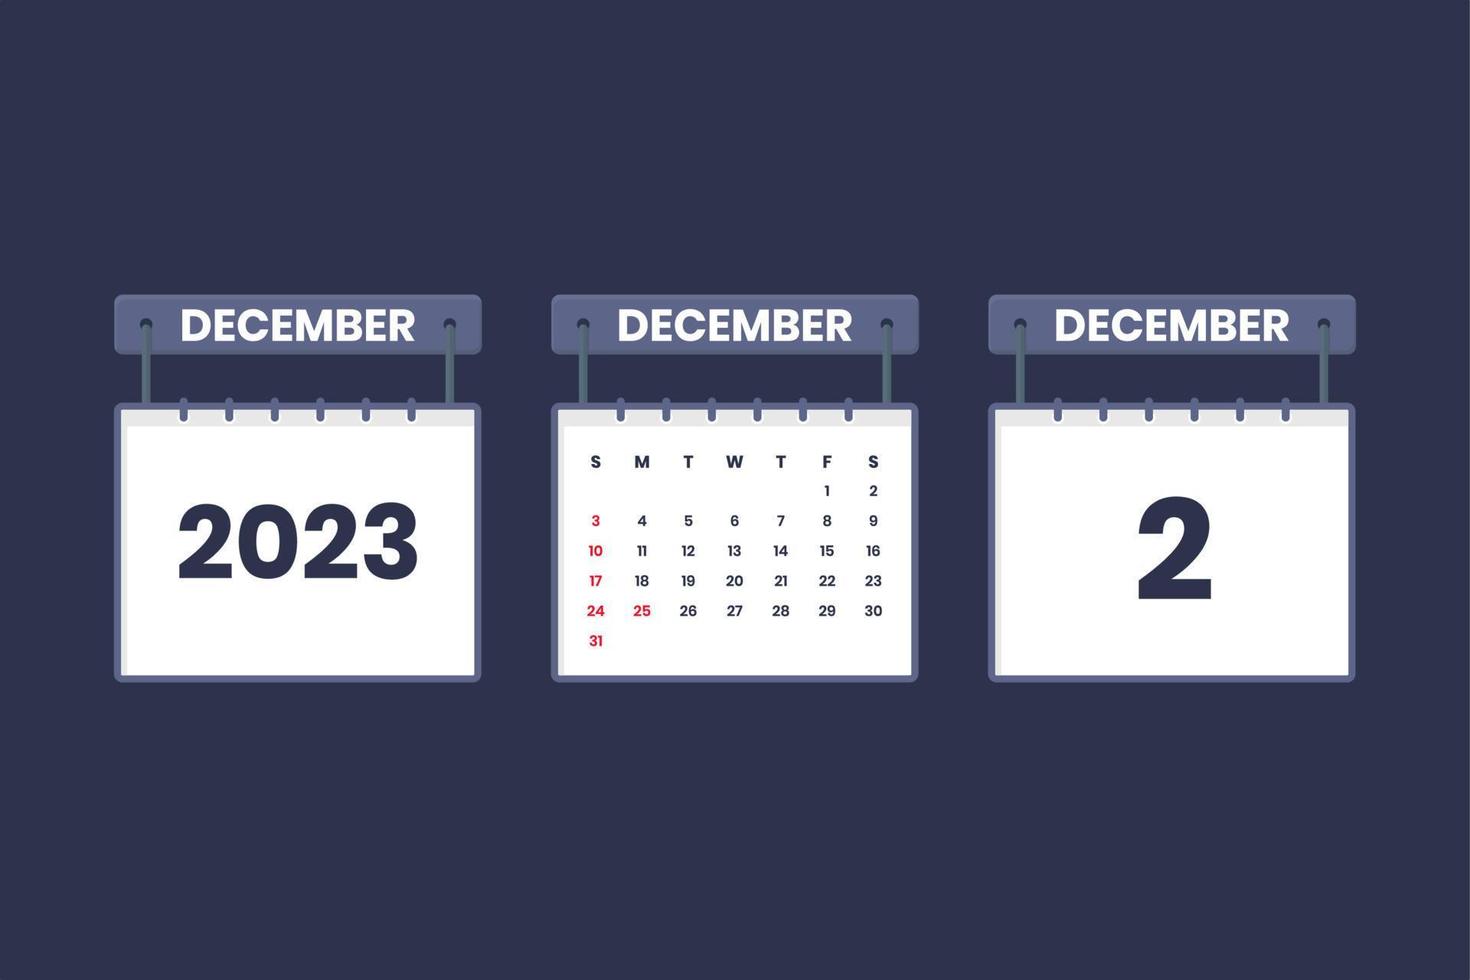 2 December 2023 calendar icon for schedule, appointment, important date concept vector